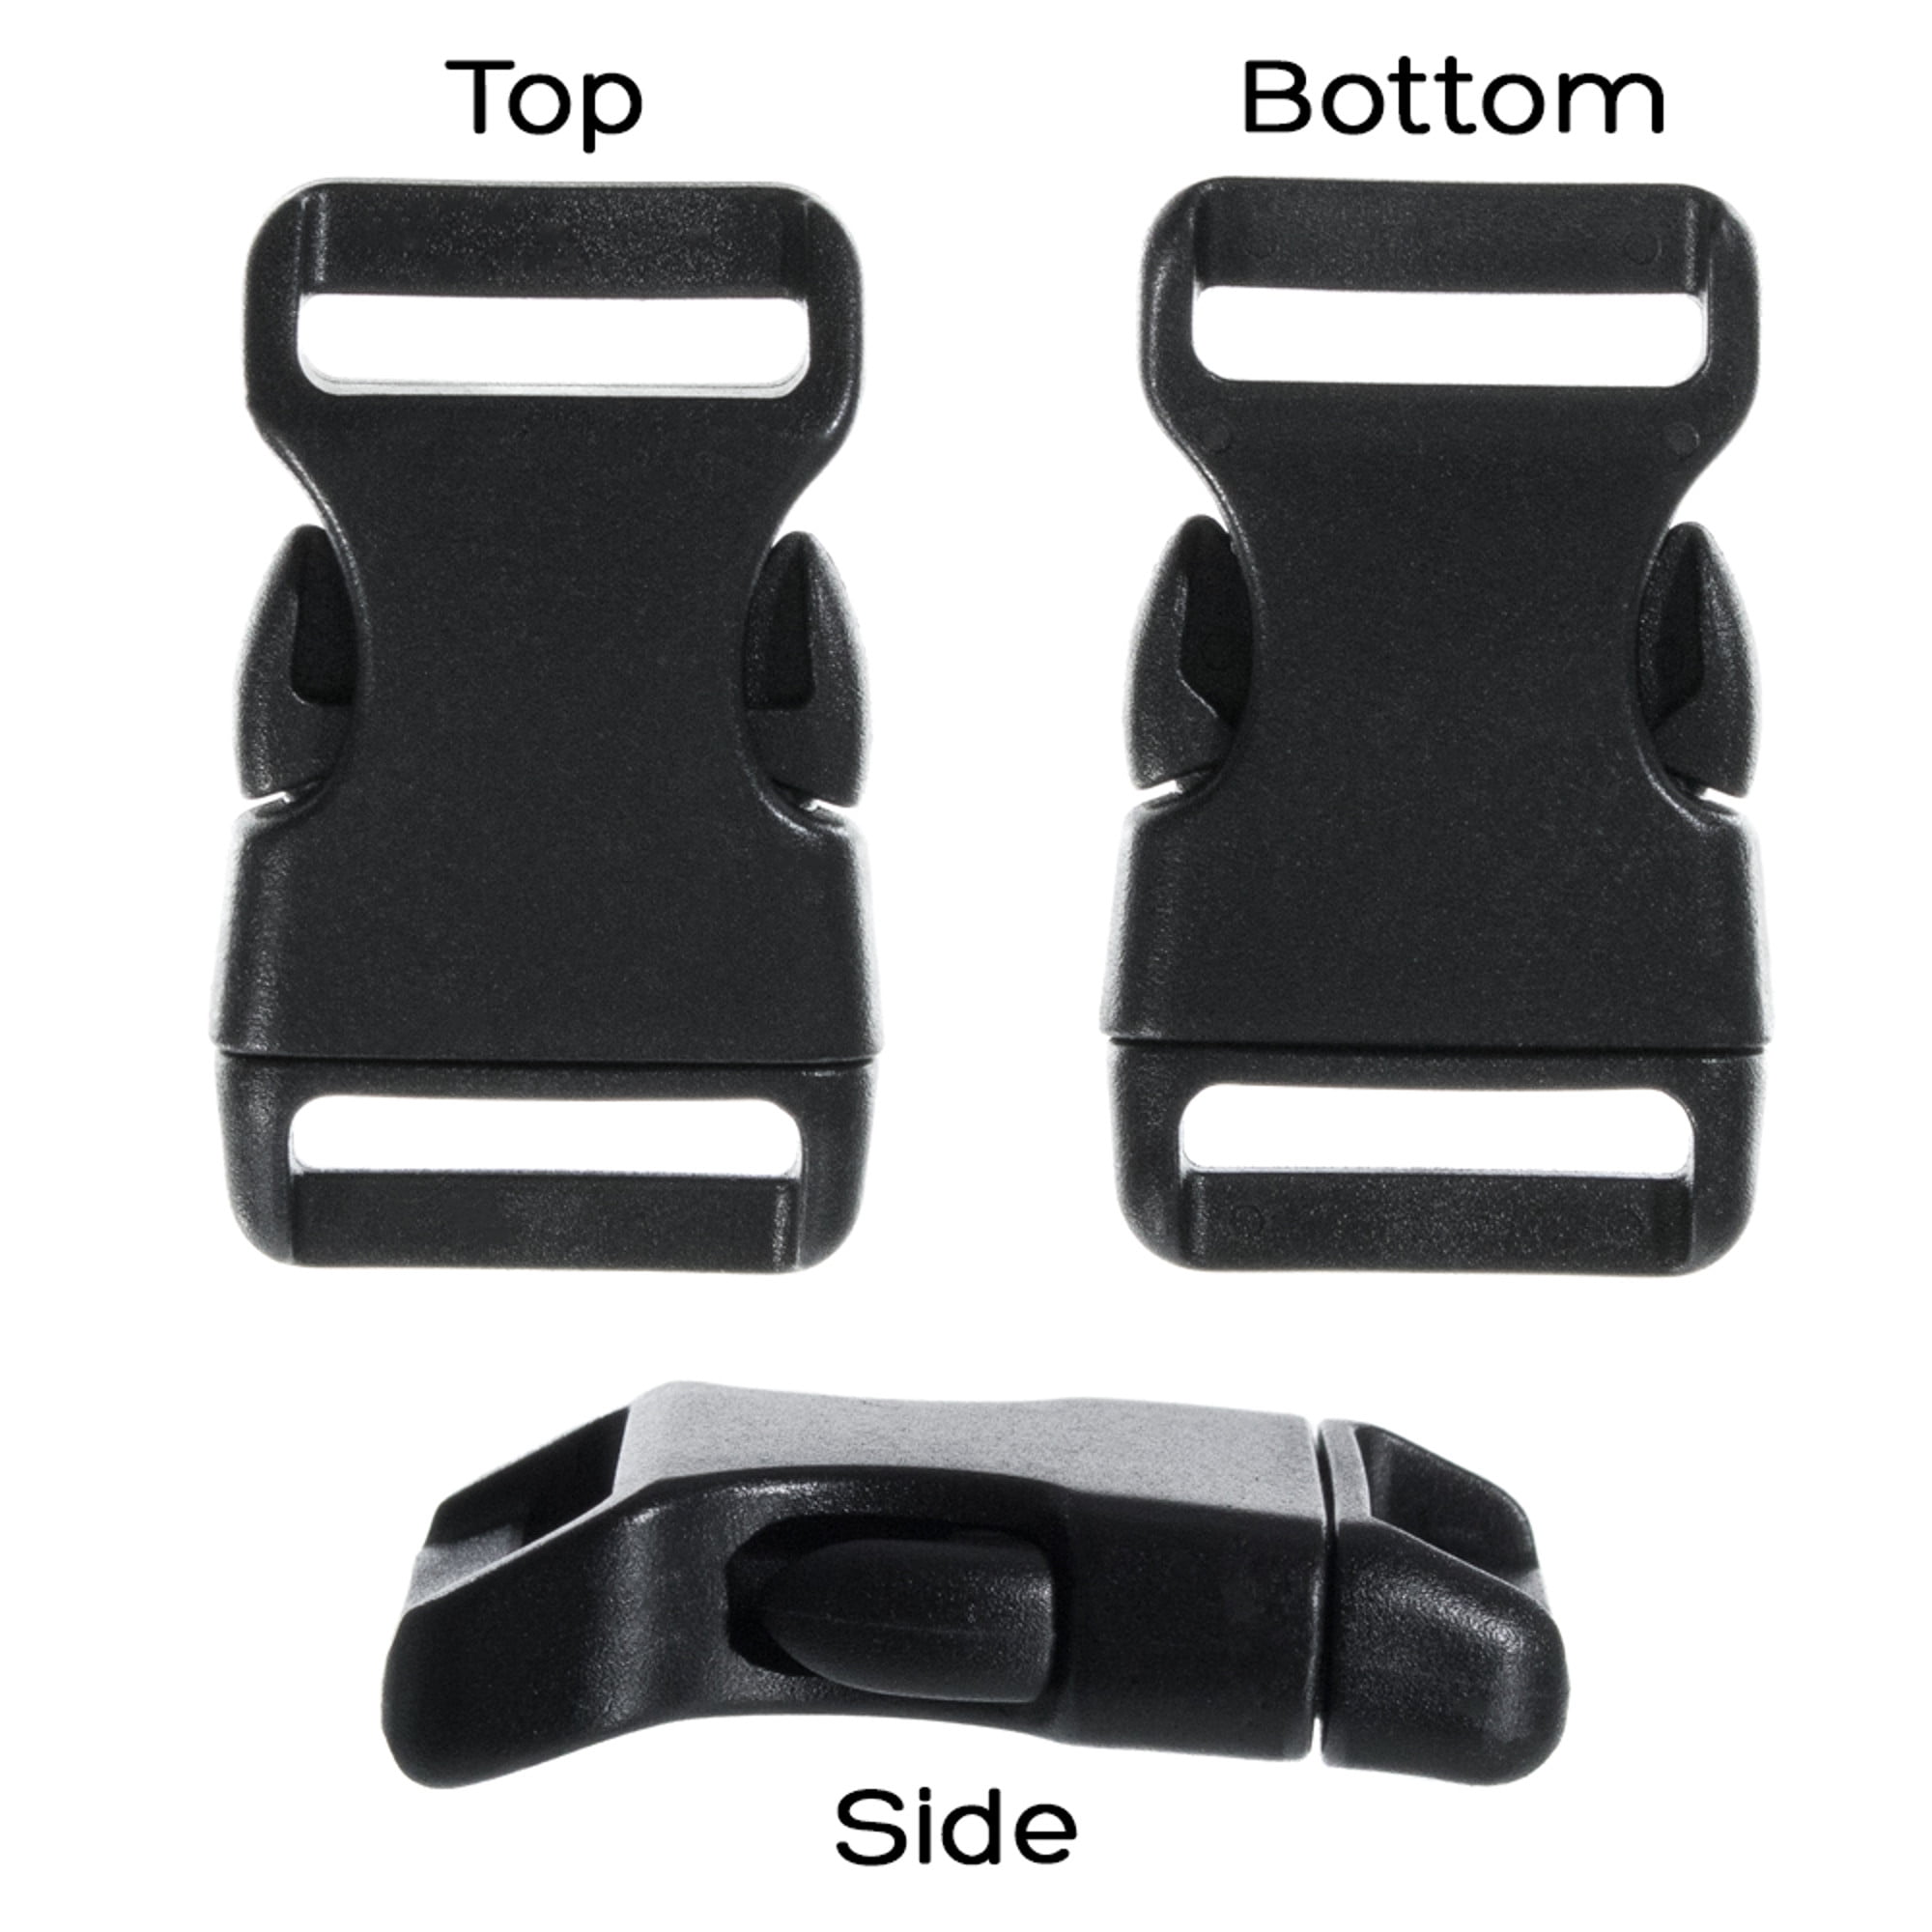  6385 1 1/4 Plastic Clamp Belt Buckle : Arts, Crafts & Sewing